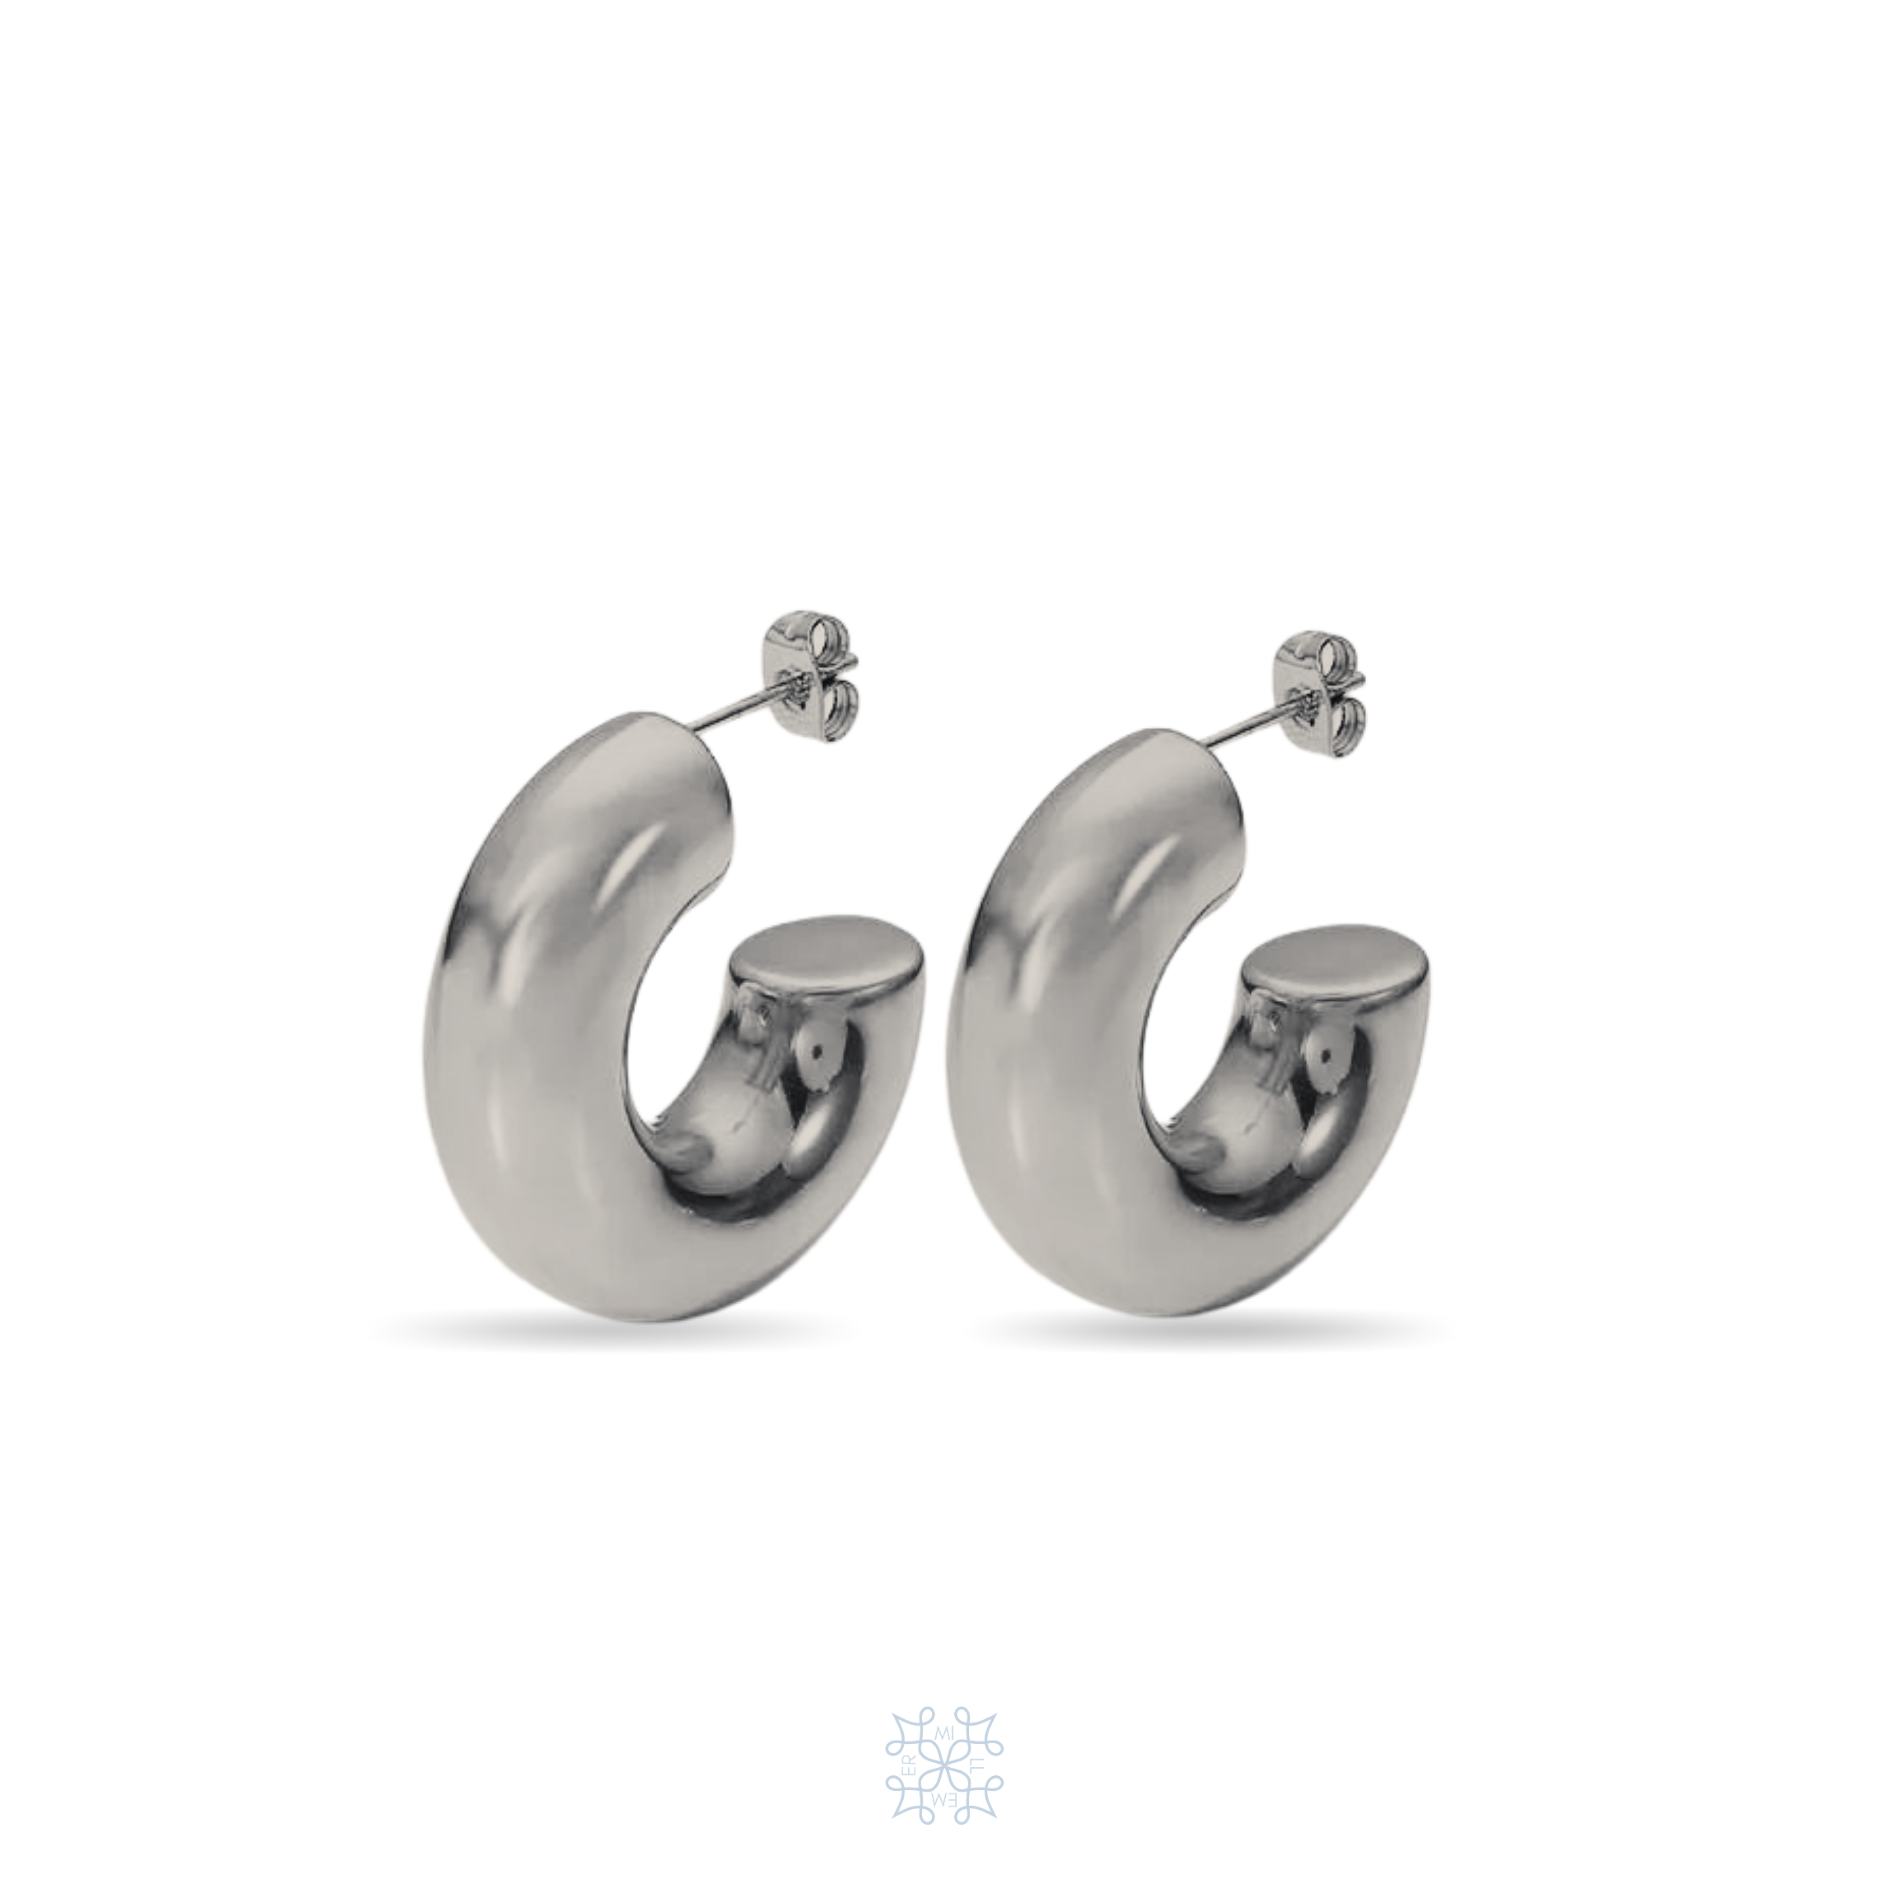 Chunky Silver Hoop Earrings. Round shape plated in silver earrings with a chunky bold look.